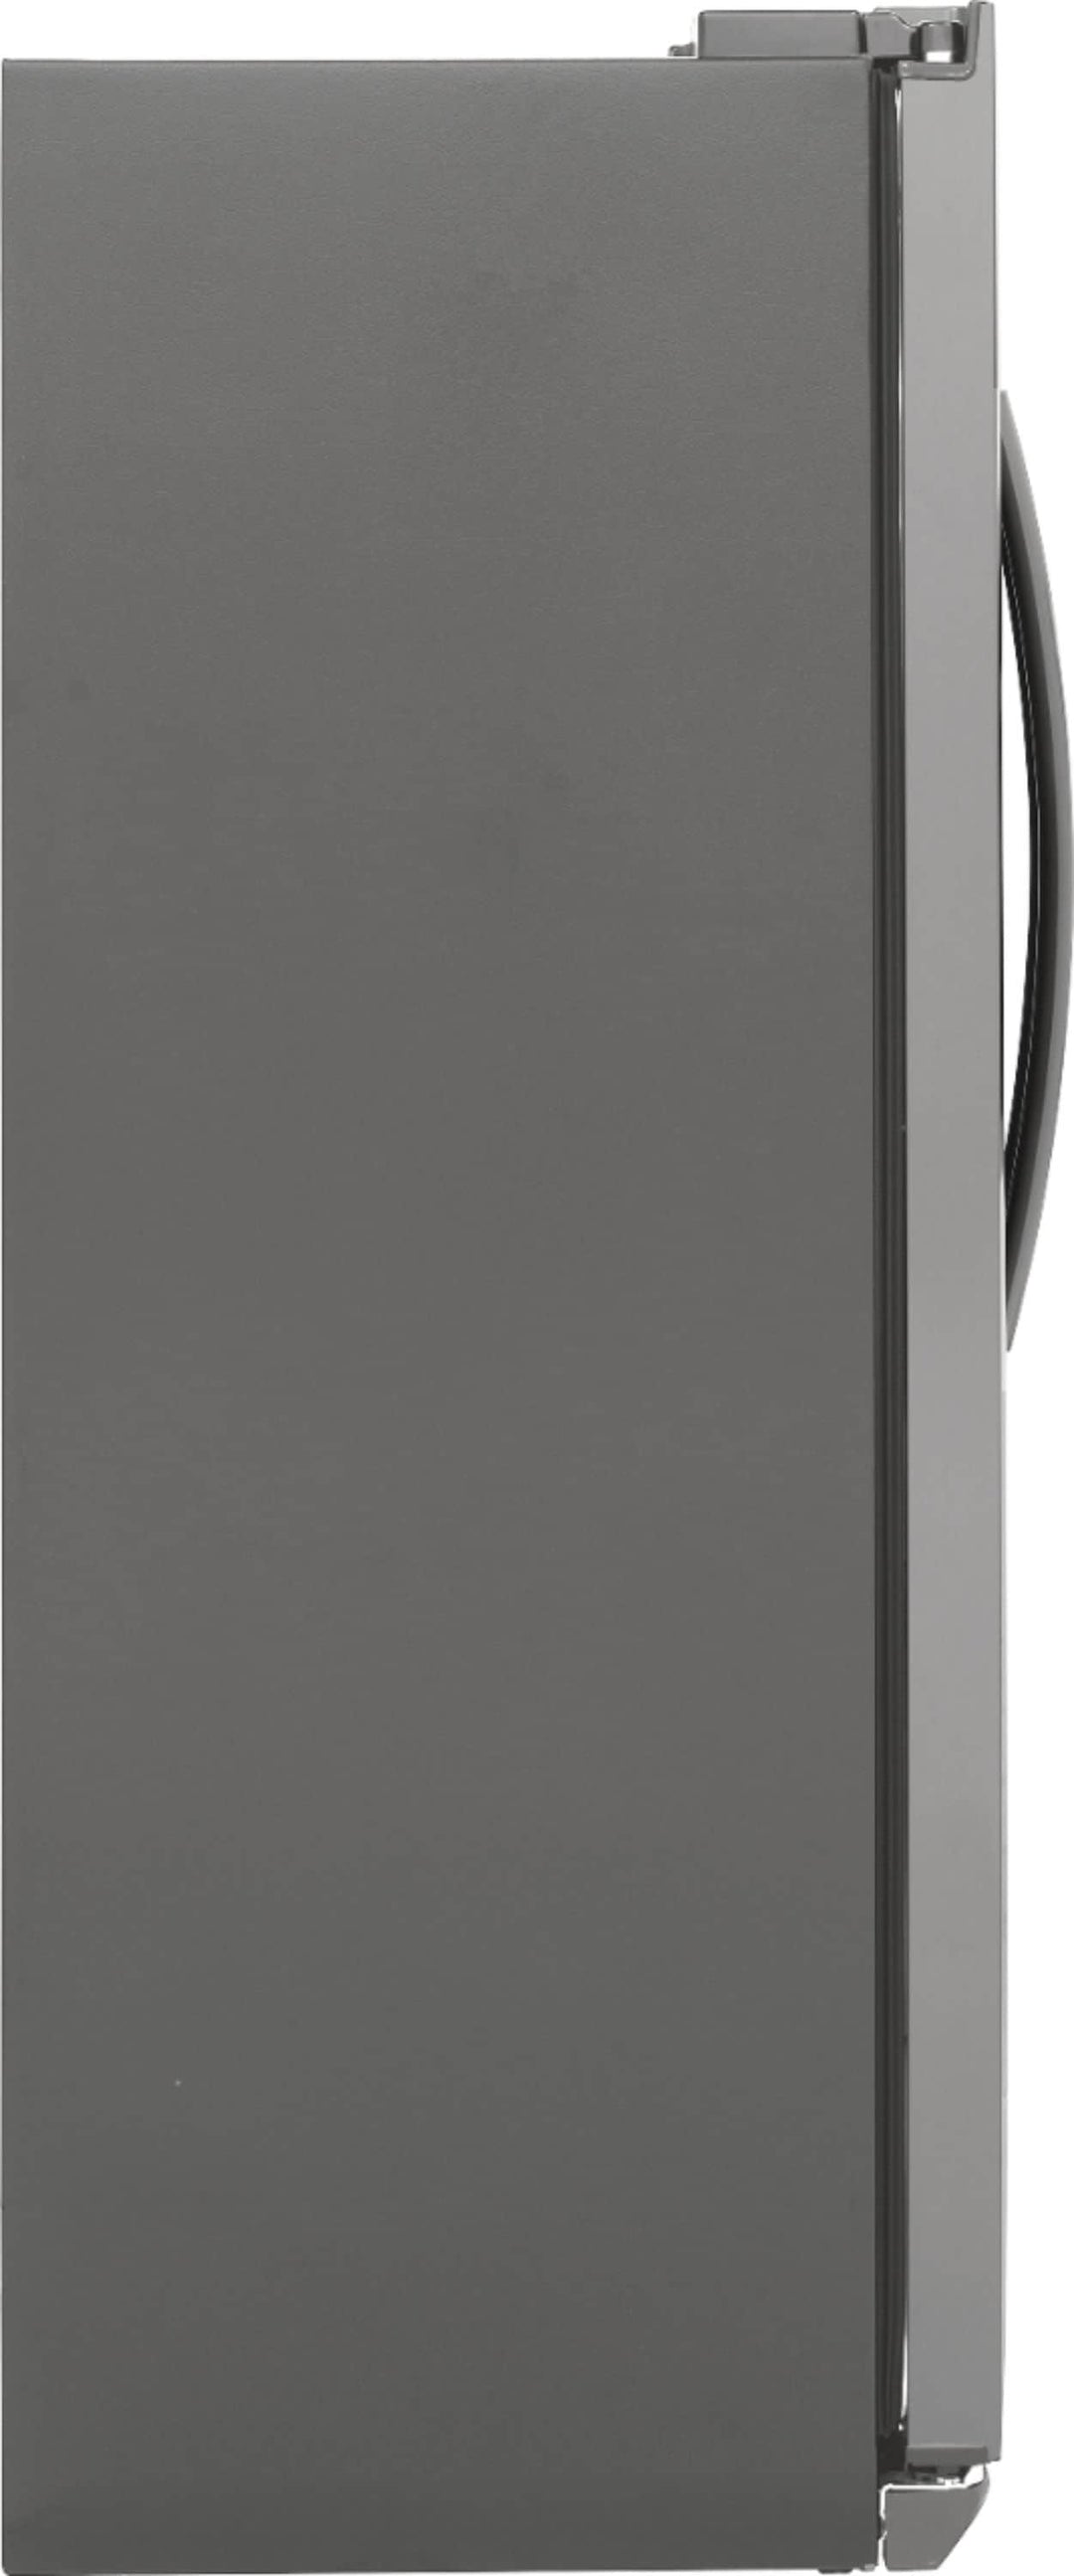 Frigidaire - Gallery 22.3 Cu. Ft. Side-by-Side Counter-Depth Refrigerator - Stainless steel_13